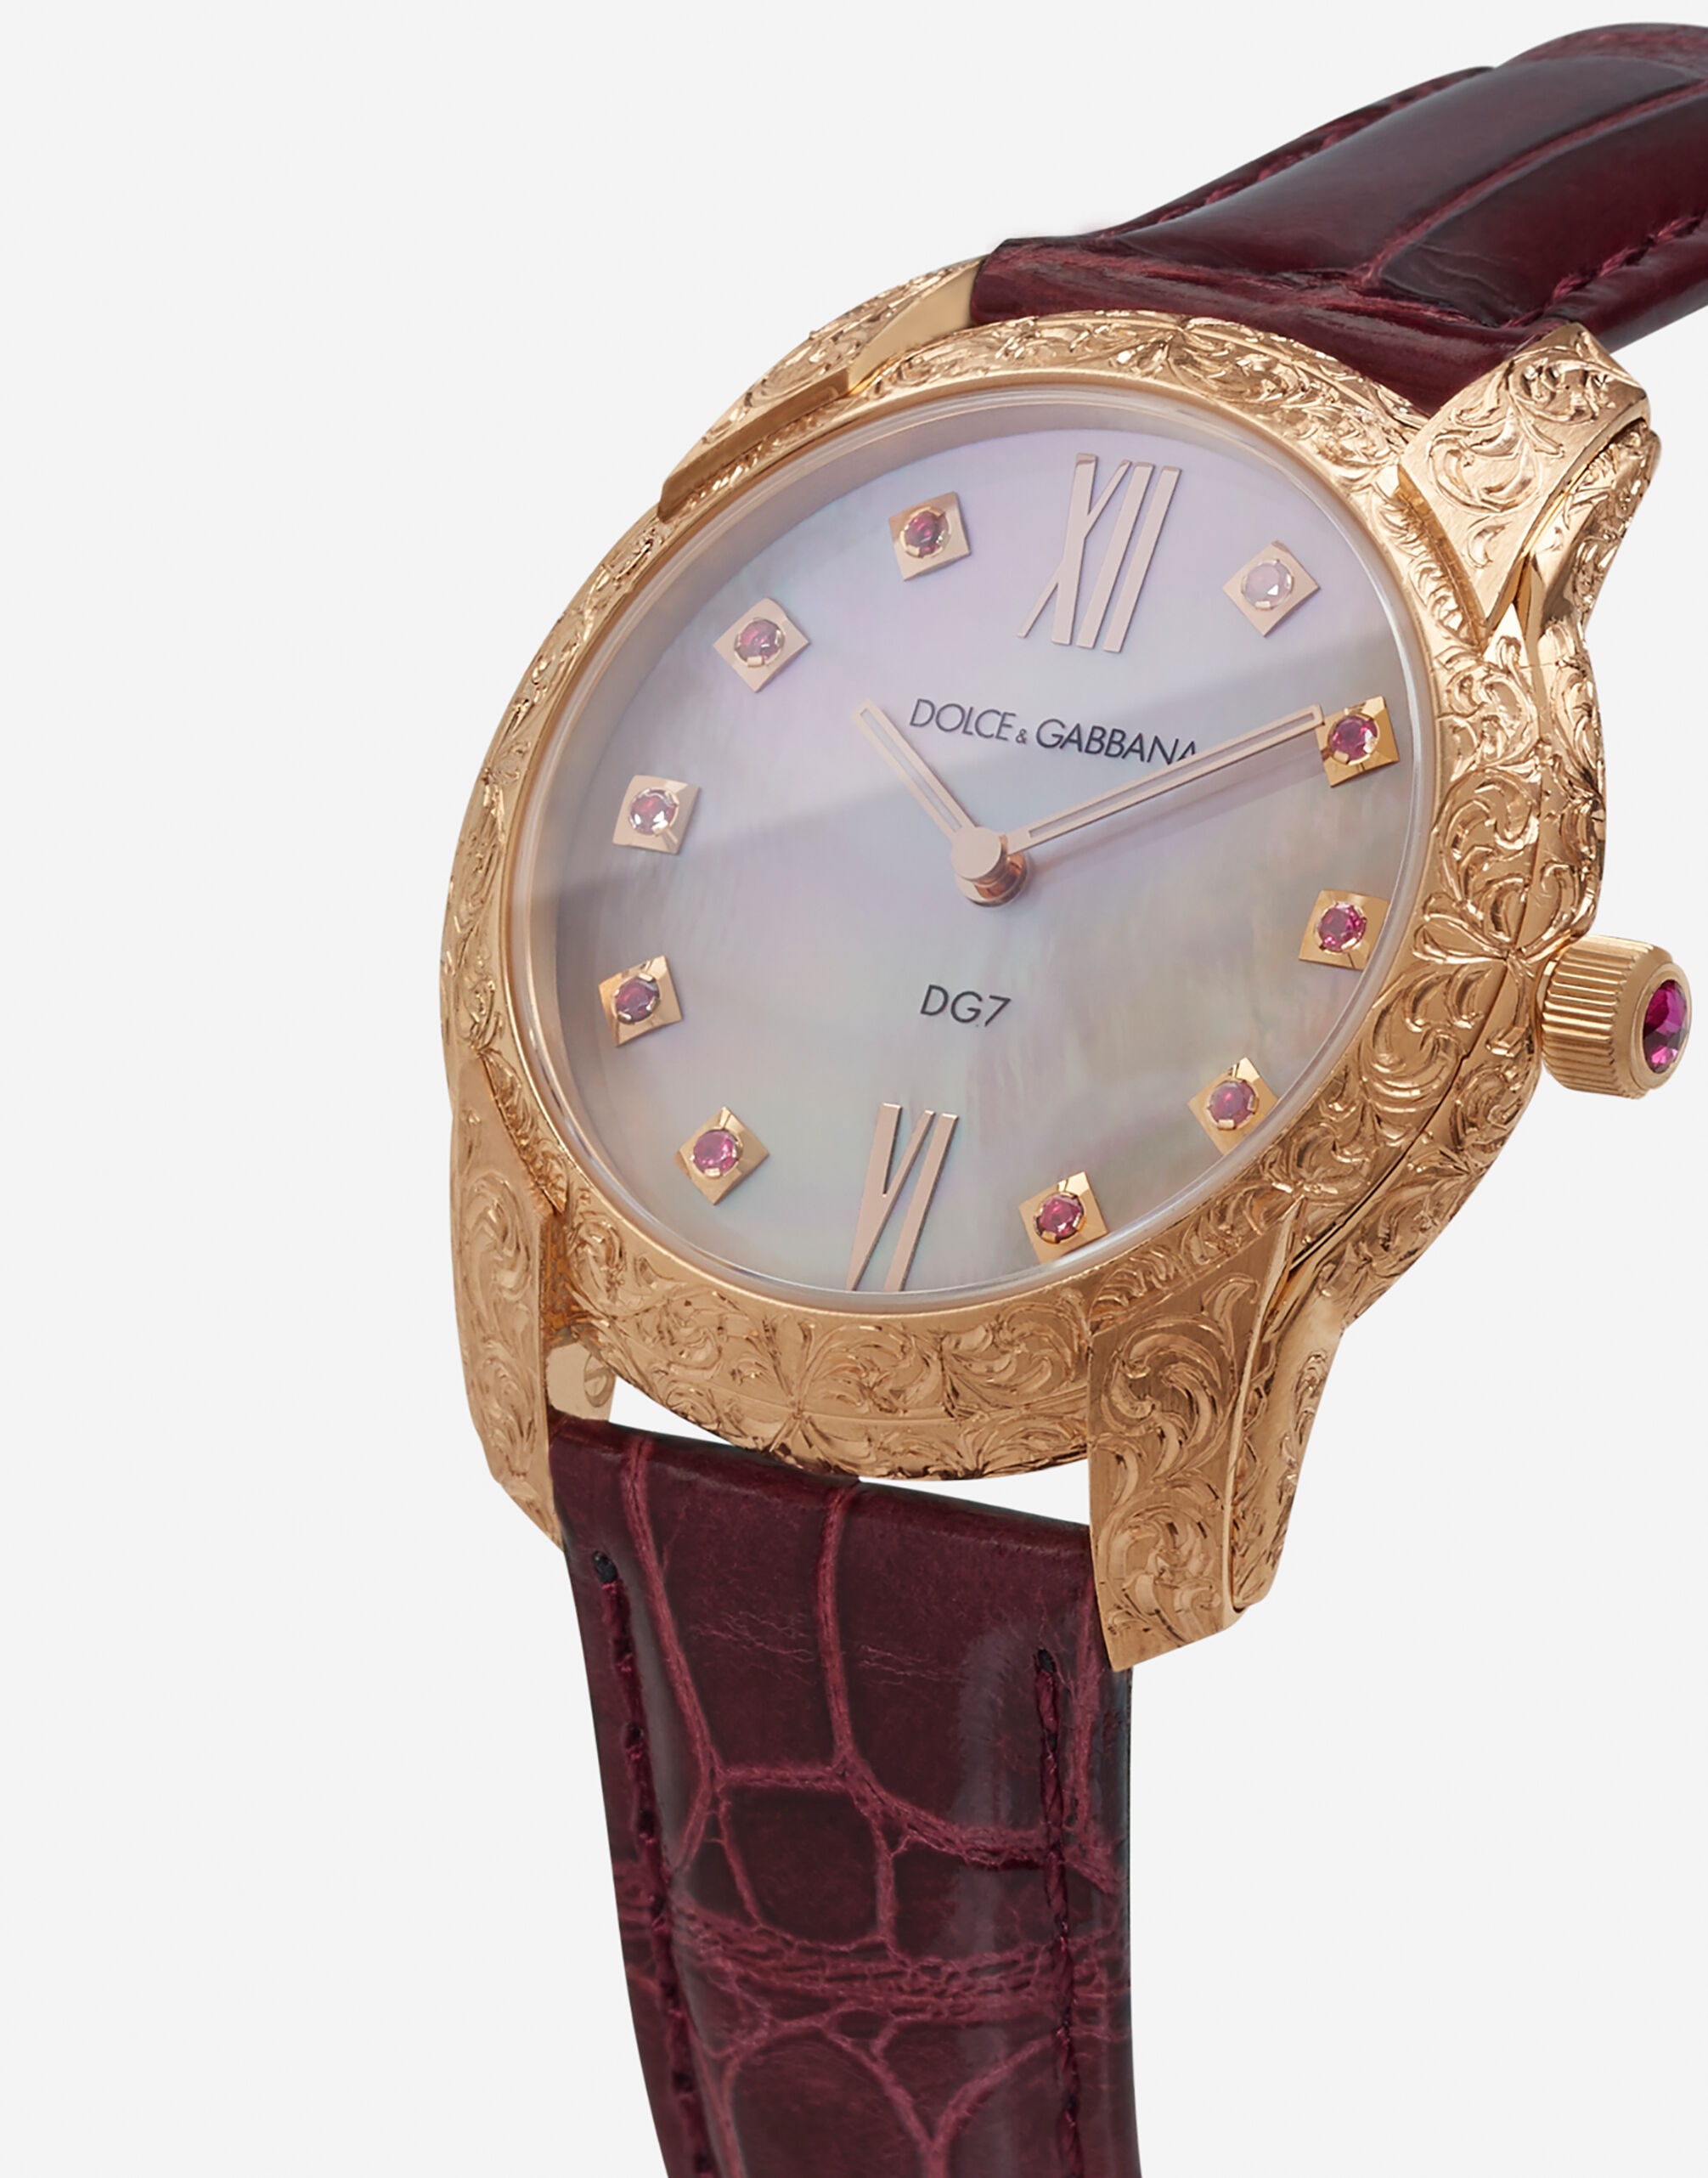 DG7 Gattopardo watch in red gold with pink mother of pearl and rubies - 2